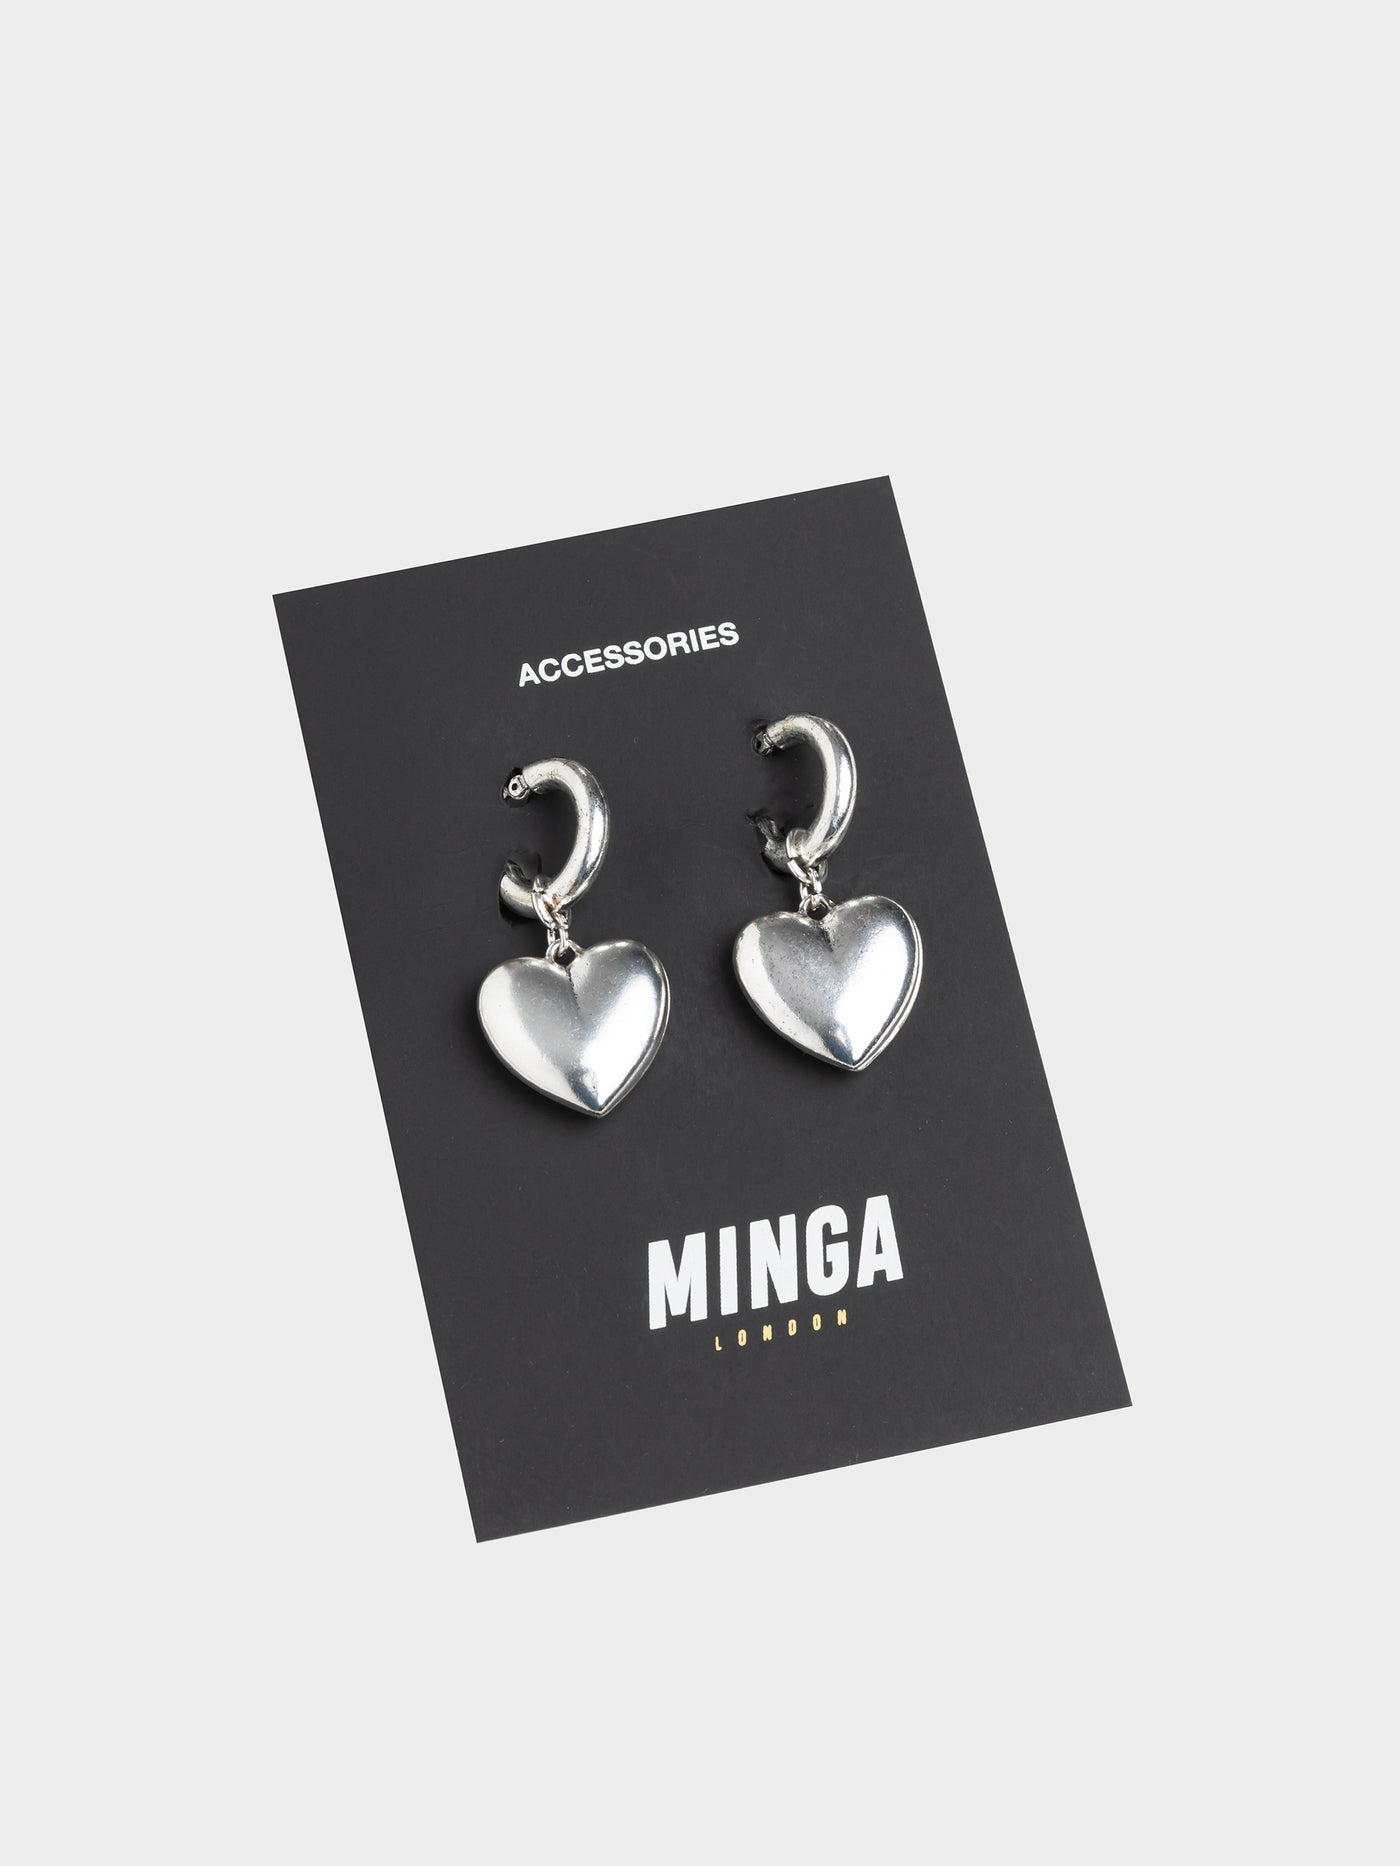 Stylish and statement-making earrings featuring chunky heart-shaped hoops for a bold and trendy look.